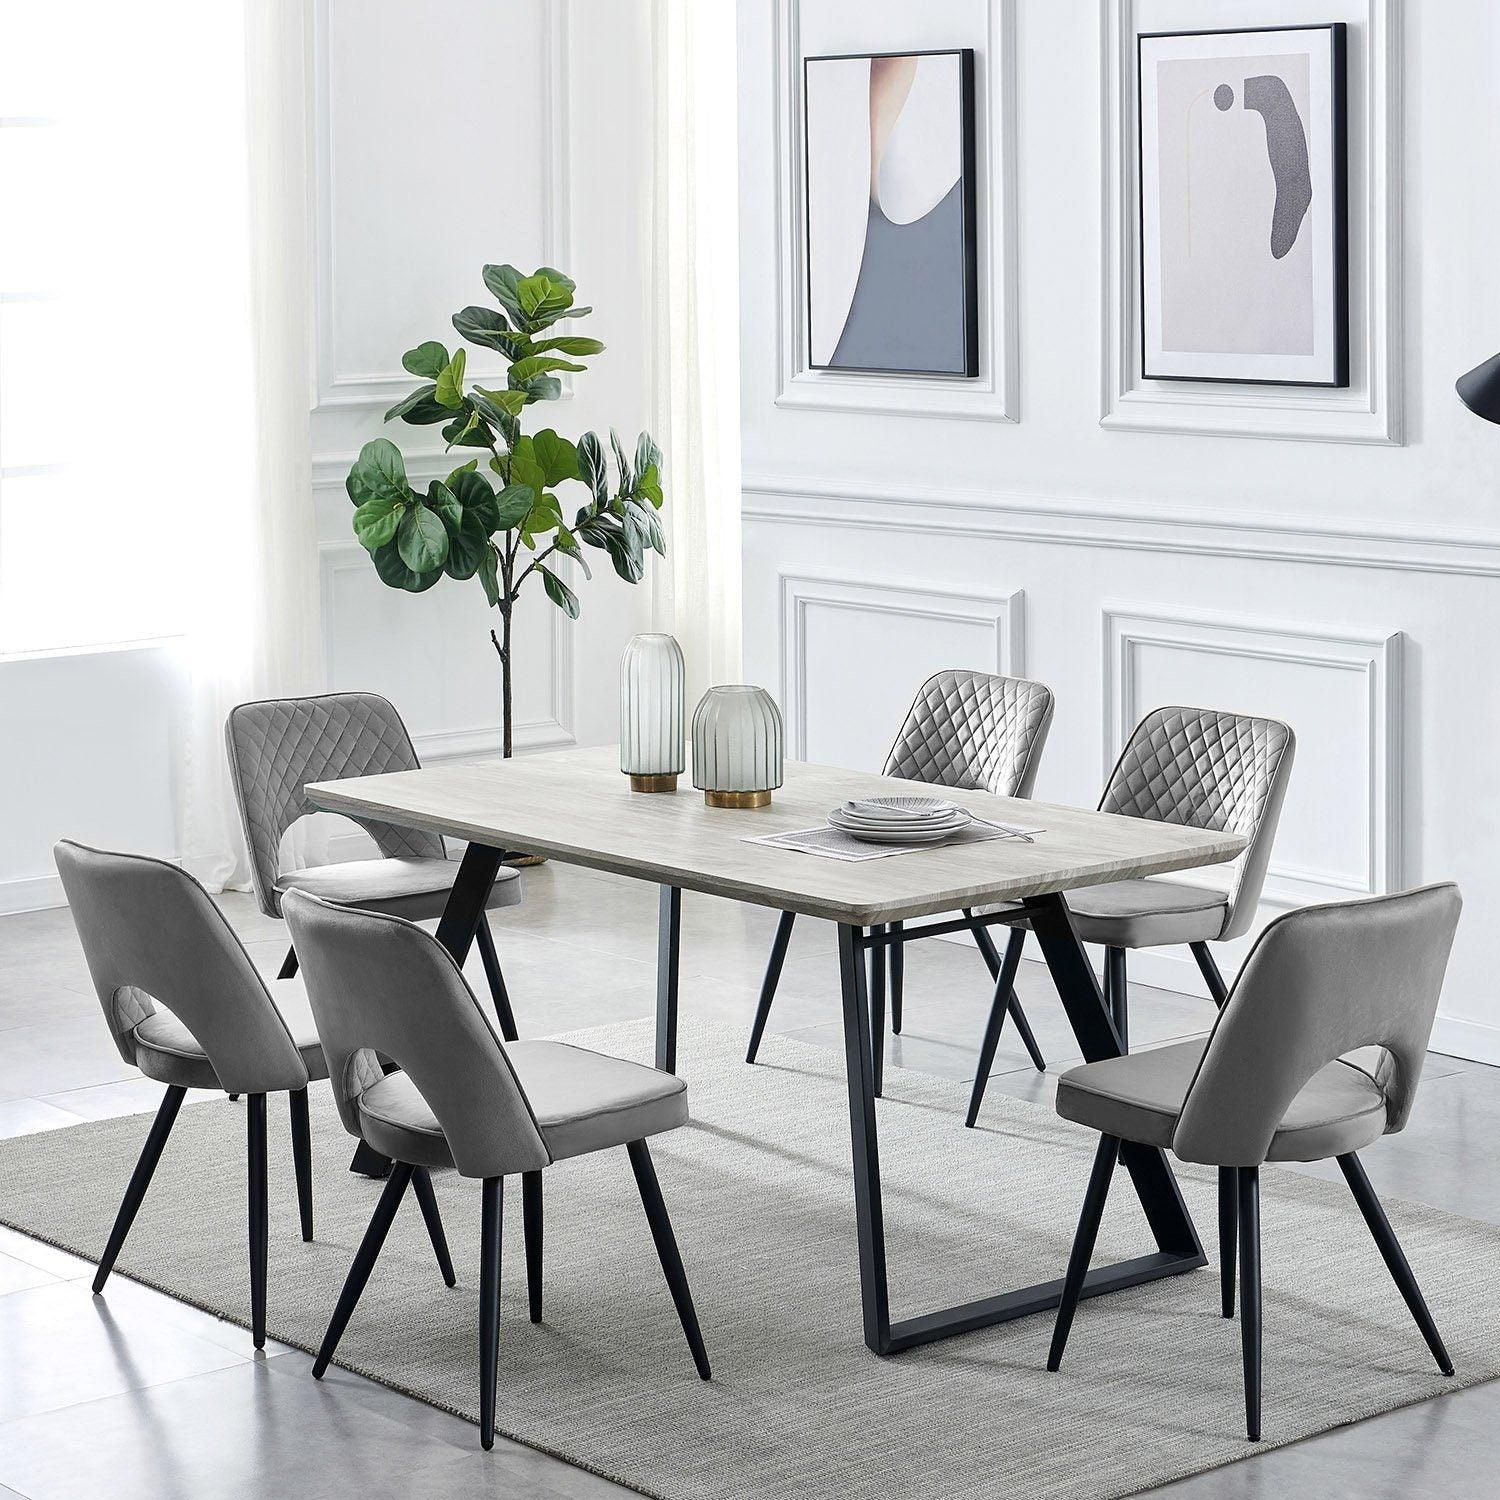 Atlas dining table set - 6 seater - grey dining chairs - Laura James